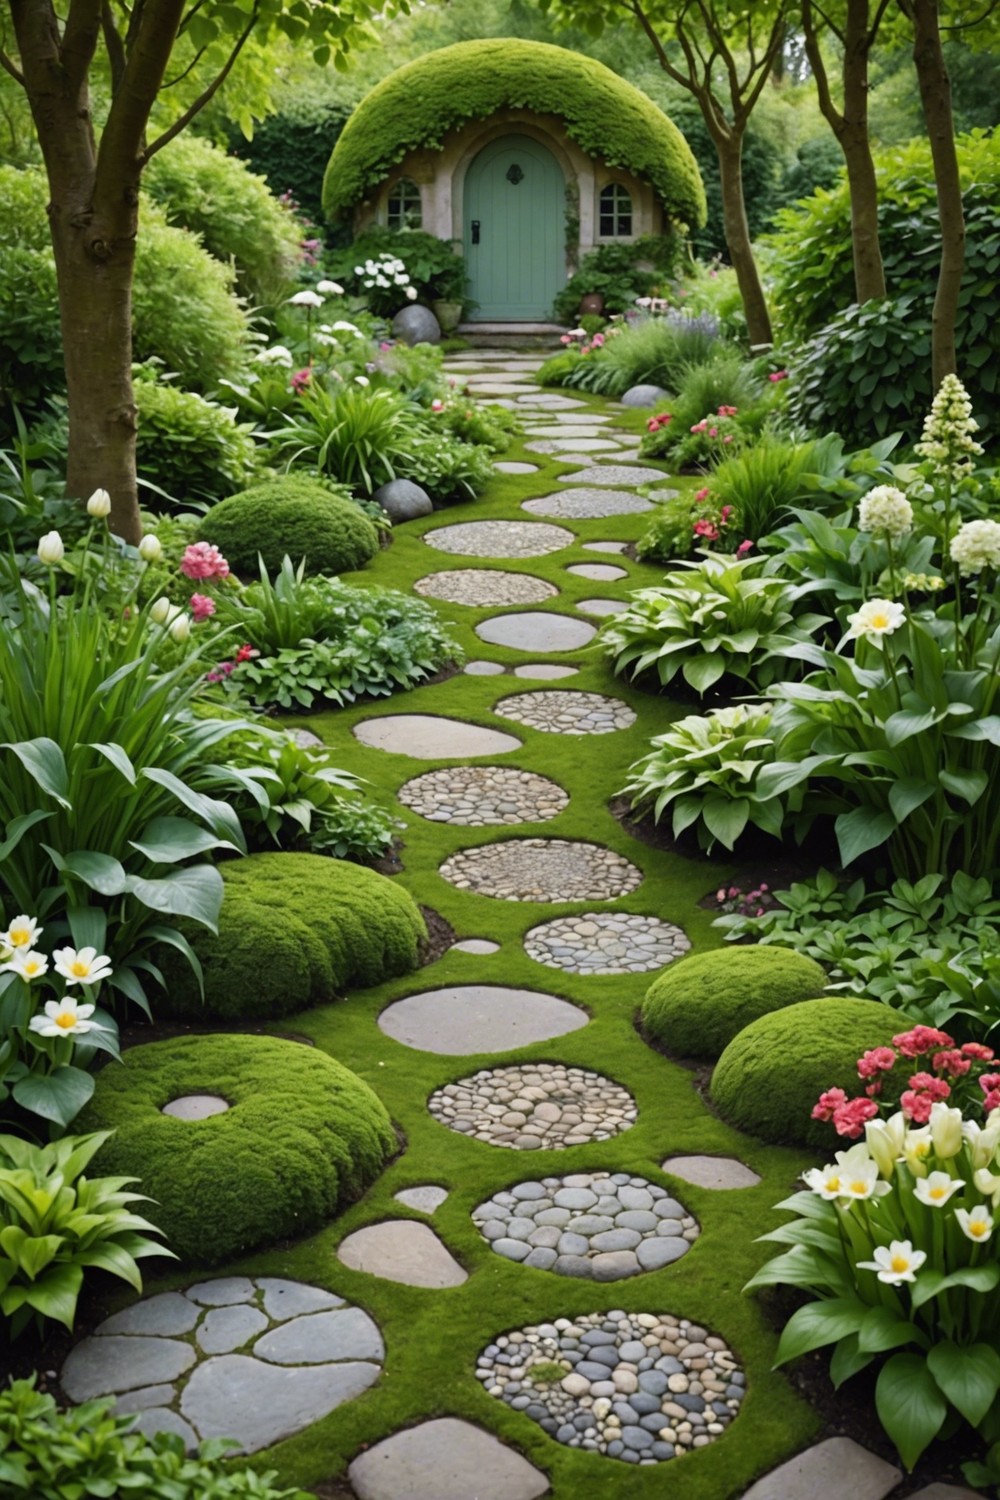 Nature-Inspired Stepping Stones